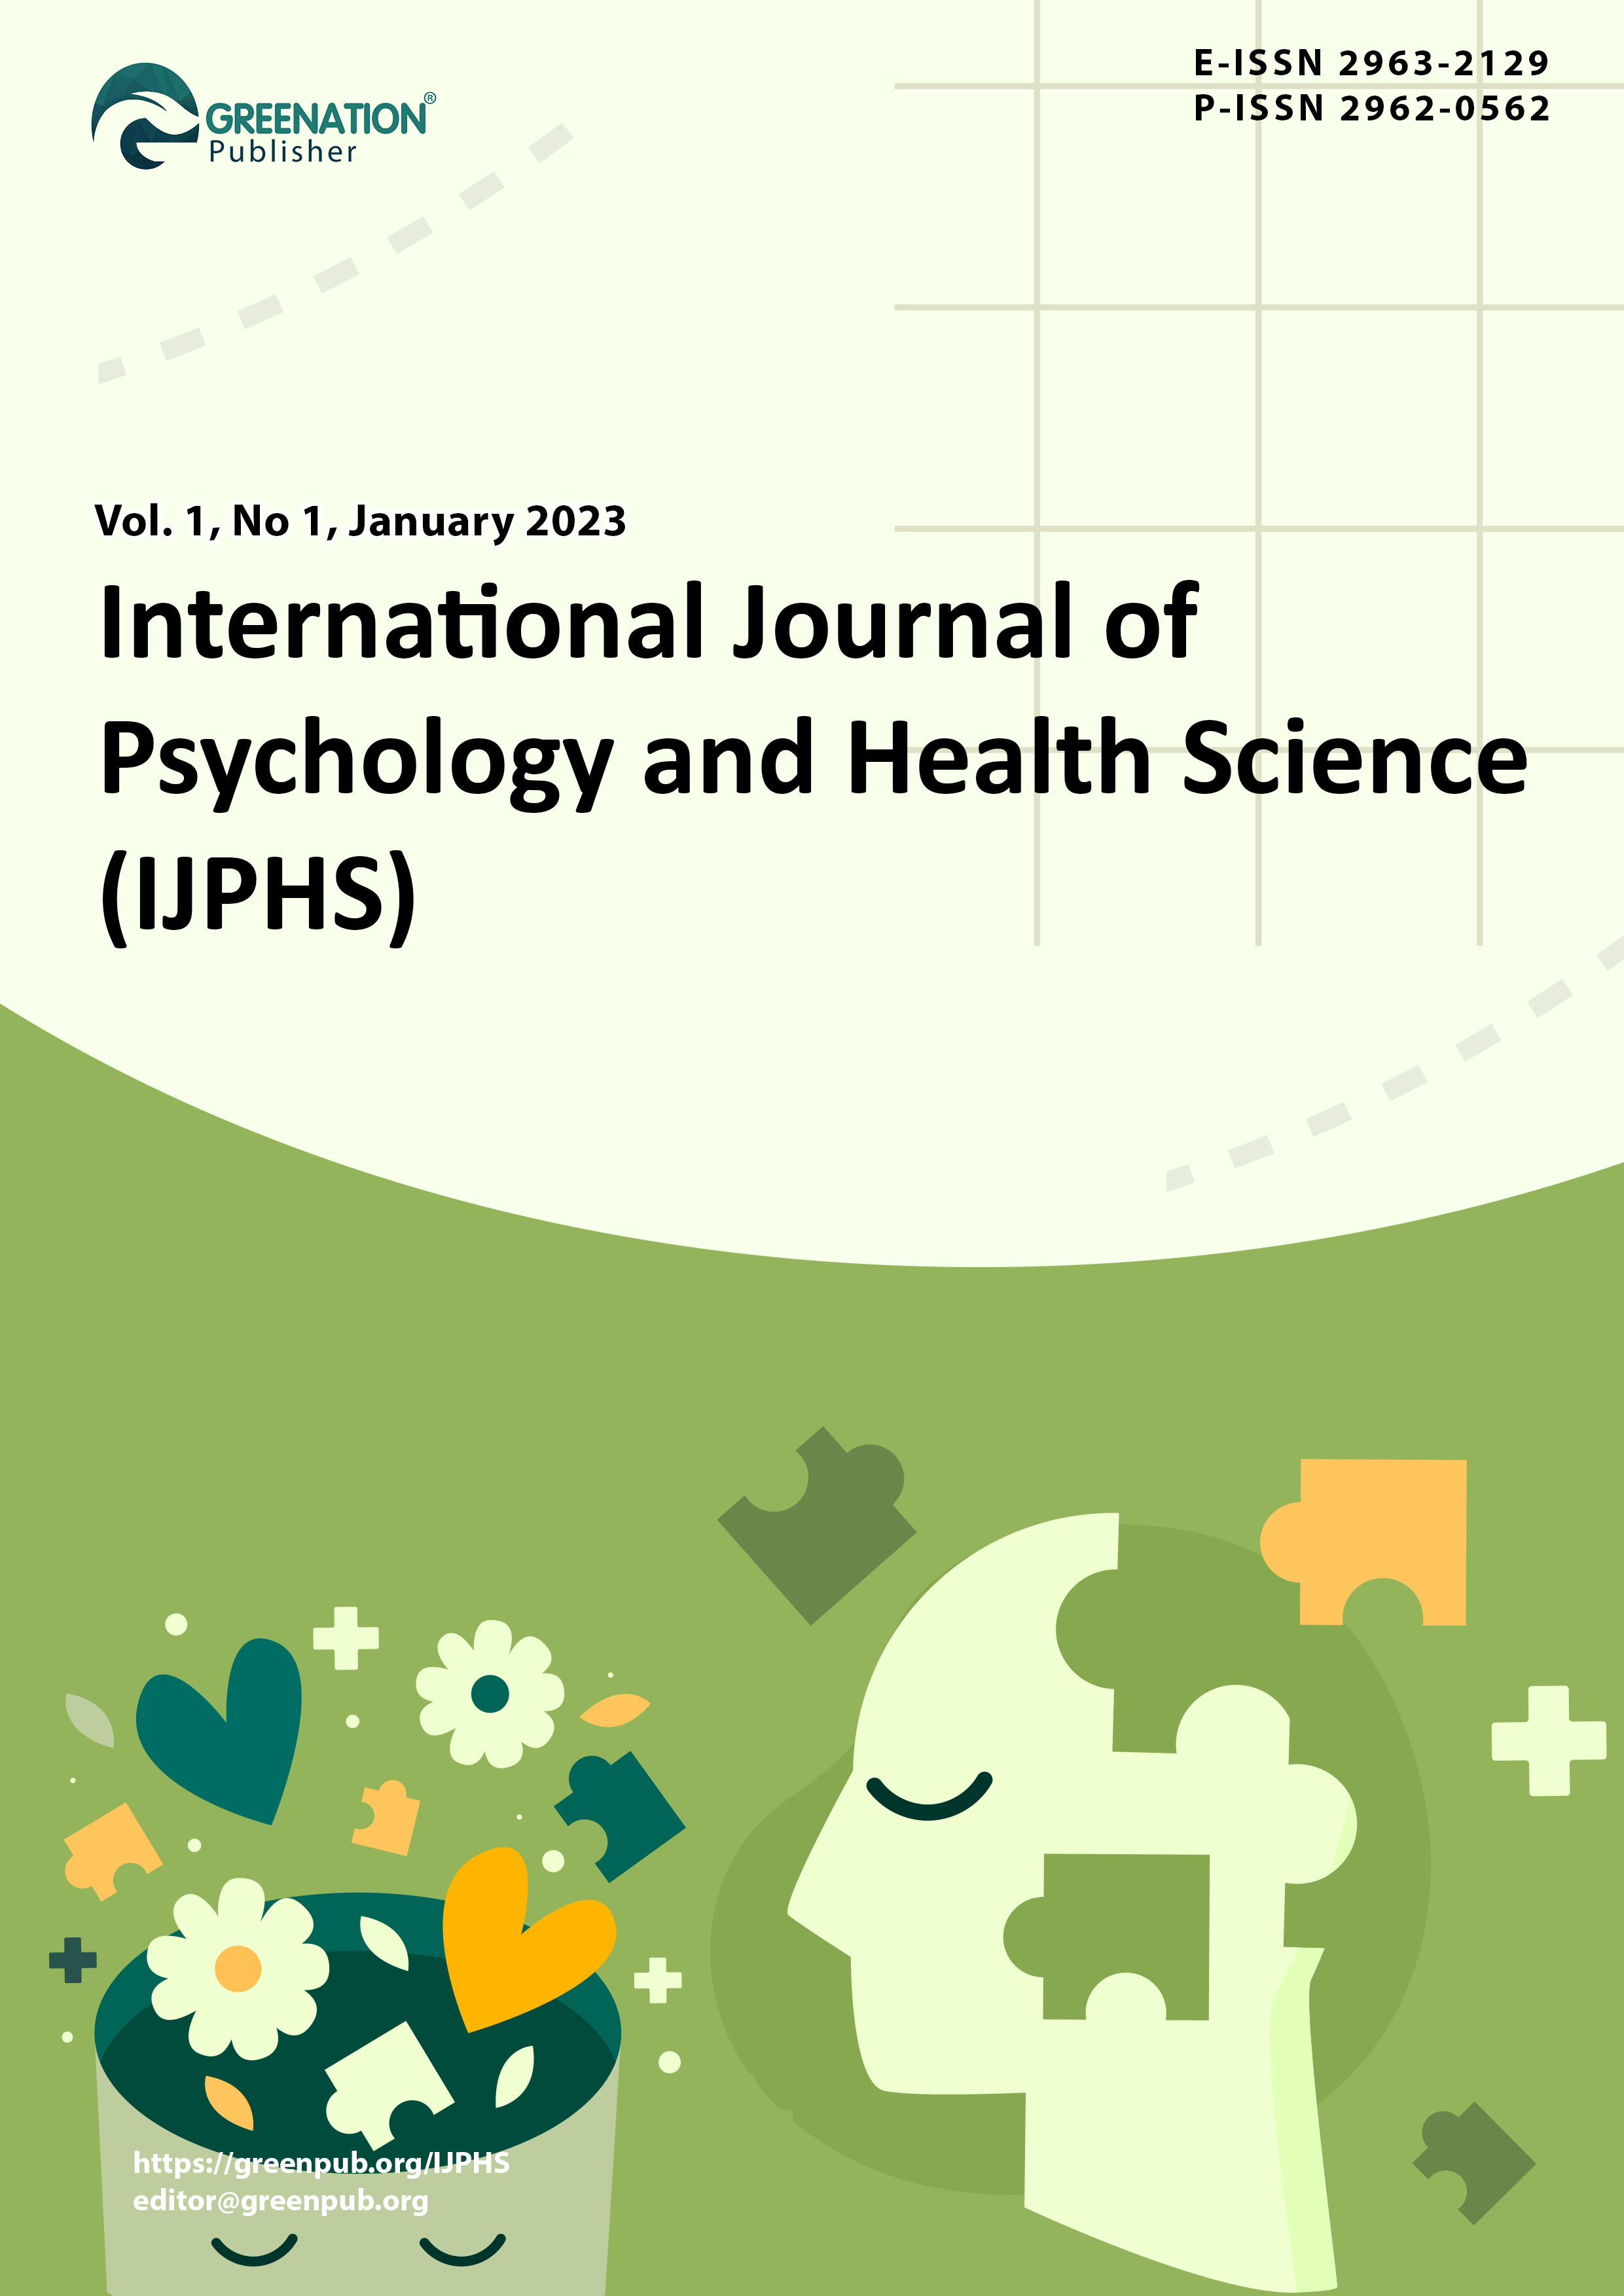 					View Vol. 1 No. 3 (2023): International Journal of Psychology and Health Science (July-September 2023)
				